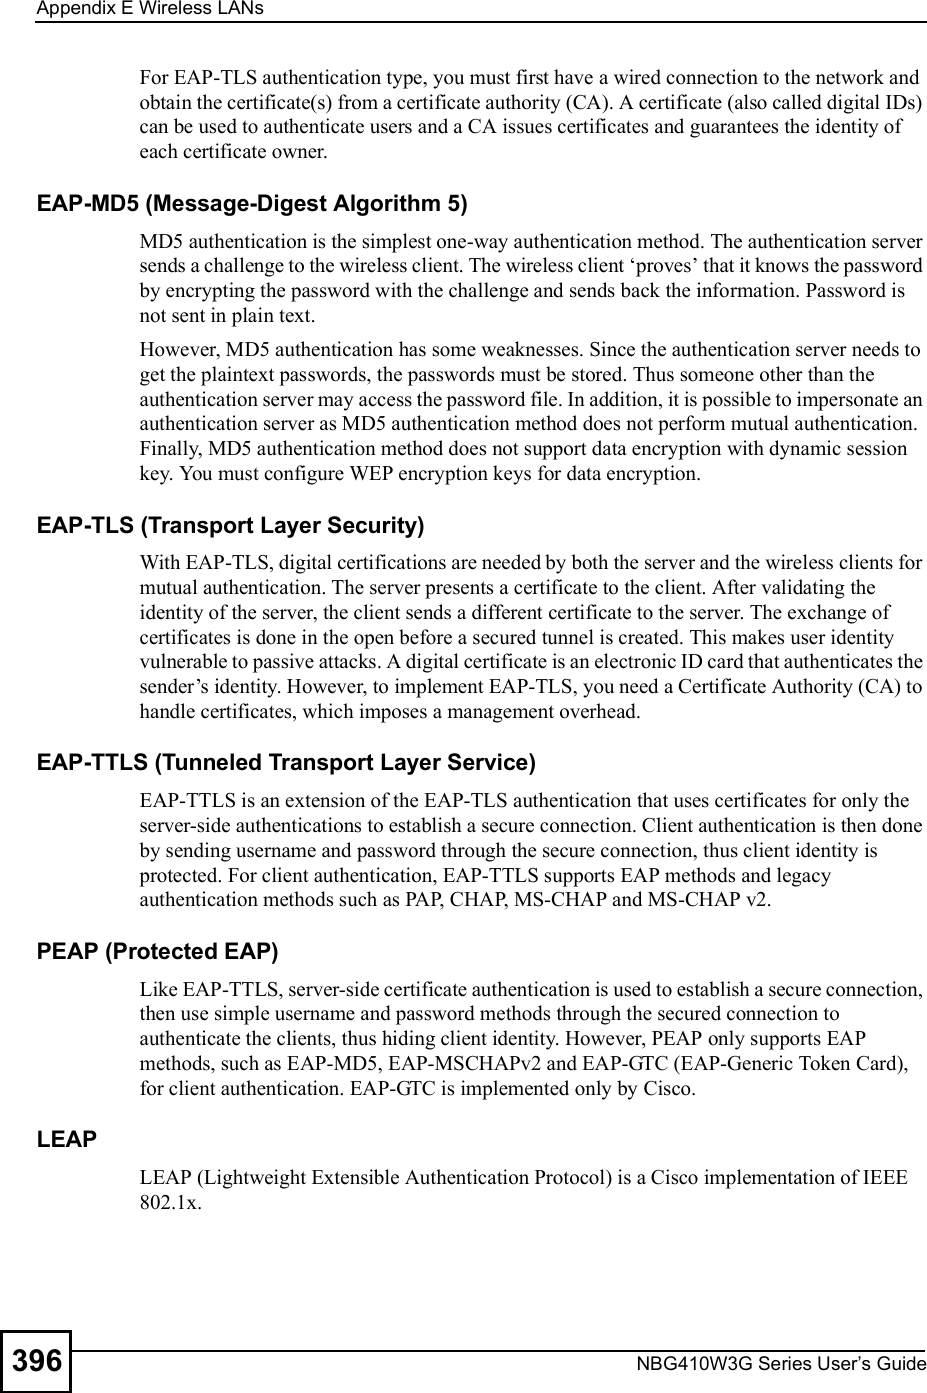 Appendix EWireless LANsNBG410W3G Series User s Guide396For EAP-TLS authentication type, you must first have a wired connection to the network and obtain the certificate(s) from a certificate authority (CA). A certificate (also called digital IDs) can be used to authenticate users and a CA issues certificates and guarantees the identity of each certificate owner.EAP-MD5 (Message-Digest Algorithm 5)MD5 authentication is the simplest one-way authentication method. The authentication server sends a challenge to the wireless client. The wireless client &apos;proves! that it knows the password by encrypting the password with the challenge and sends back the information. Password is not sent in plain text. However, MD5 authentication has some weaknesses. Since the authentication server needs to get the plaintext passwords, the passwords must be stored. Thus someone other than the authentication server may access the password file. In addition, it is possible to impersonate an authentication server as MD5 authentication method does not perform mutual authentication. Finally, MD5 authentication method does not support data encryption with dynamic session key. You must configure WEP encryption keys for data encryption. EAP-TLS (Transport Layer Security)With EAP-TLS, digital certifications are needed by both the server and the wireless clients for mutual authentication. The server presents a certificate to the client. After validating the identity of the server, the client sends a different certificate to the server. The exchange of certificates is done in the open before a secured tunnel is created. This makes user identity vulnerable to passive attacks. A digital certificate is an electronic ID card that authenticates the sender!s identity. However, to implement EAP-TLS, you need a Certificate Authority (CA) to handle certificates, which imposes a management overhead. EAP-TTLS (Tunneled Transport Layer Service) EAP-TTLS is an extension of the EAP-TLS authentication that uses certificates for only the server-side authentications to establish a secure connection. Client authentication is then done by sending username and password through the secure connection, thus client identity is protected. For client authentication, EAP-TTLS supports EAP methods and legacy authentication methods such as PAP, CHAP, MS-CHAP and MS-CHAP v2. PEAP (Protected EAP)   Like EAP-TTLS, server-side certificate authentication is used to establish a secure connection, then use simple username and password methods through the secured connection to authenticate the clients, thus hiding client identity. However, PEAP only supports EAP methods, such as EAP-MD5, EAP-MSCHAPv2 and EAP-GTC (EAP-Generic Token Card), for client authentication. EAP-GTC is implemented only by Cisco.LEAPLEAP (Lightweight Extensible Authentication Protocol) is a Cisco implementation of IEEE 802.1x. 